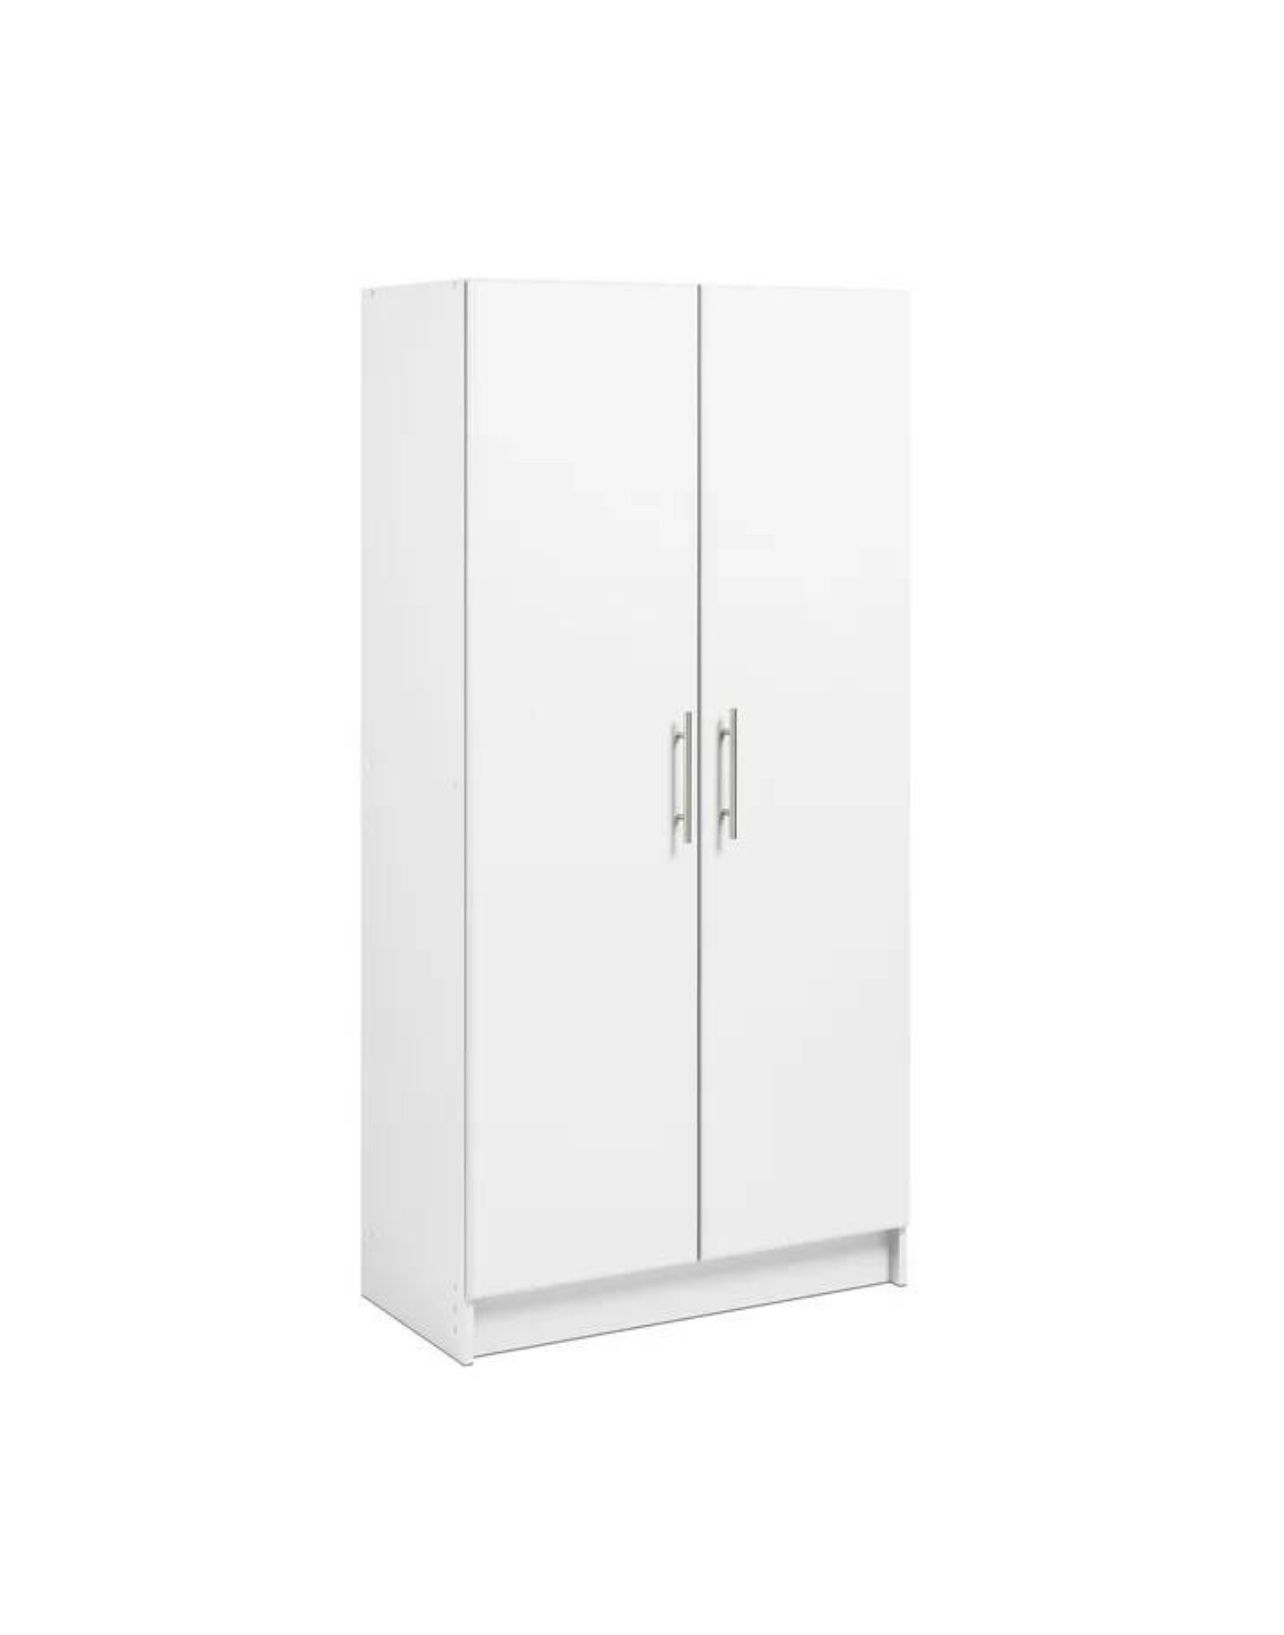 White storage cabinet pantry with adjustable shelves - NEW